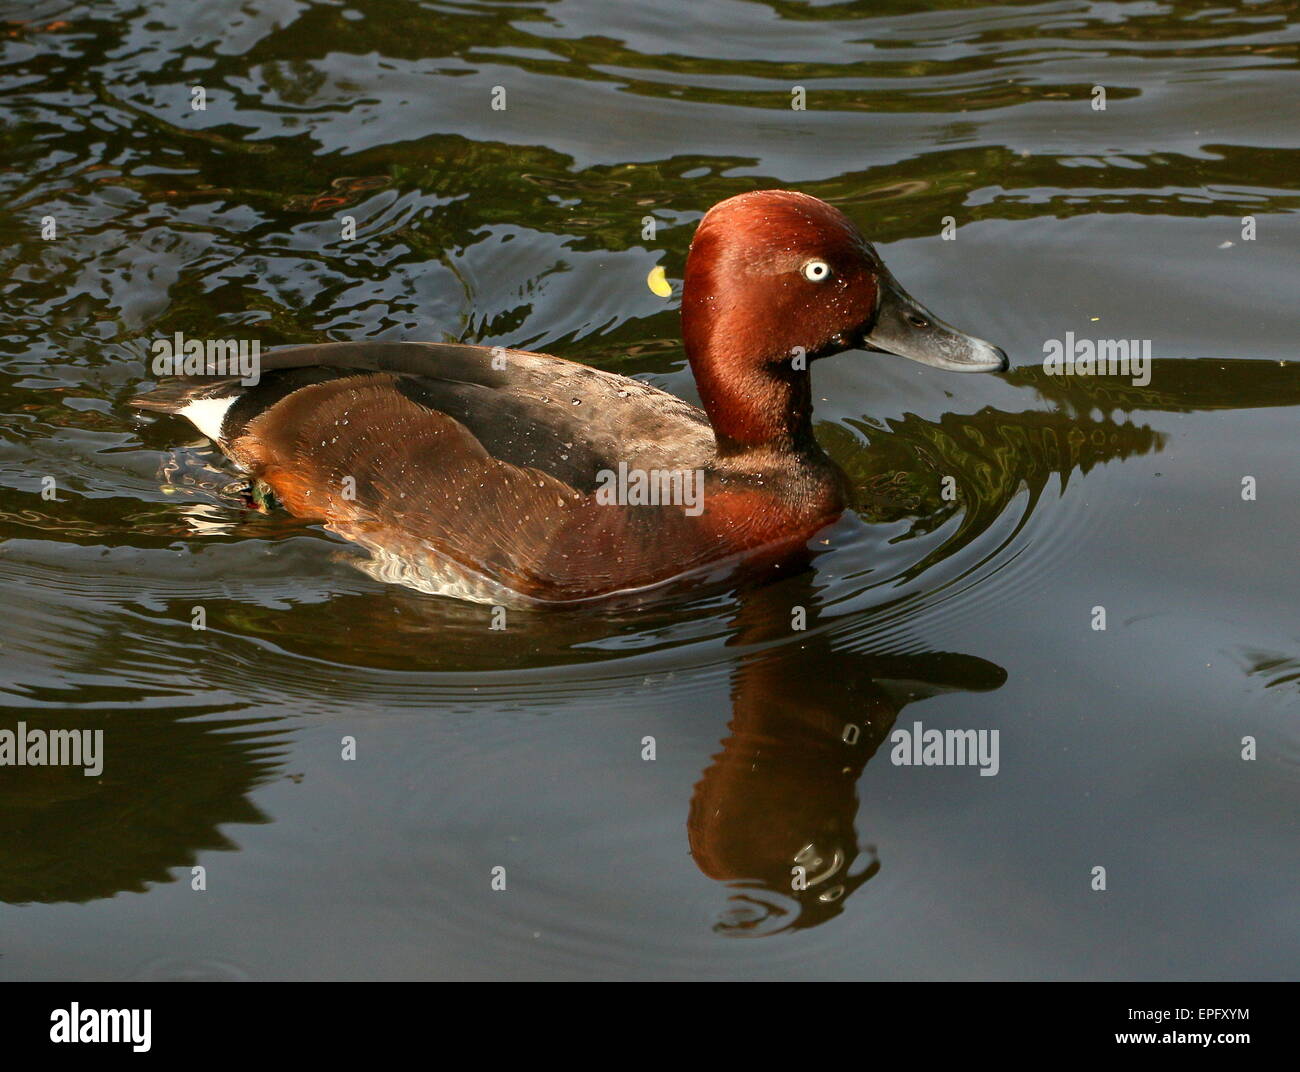 Close-up of a Eurasian Ferruginous duck or pochard (Aythya nyroca) swimming in a lake Stock Photo